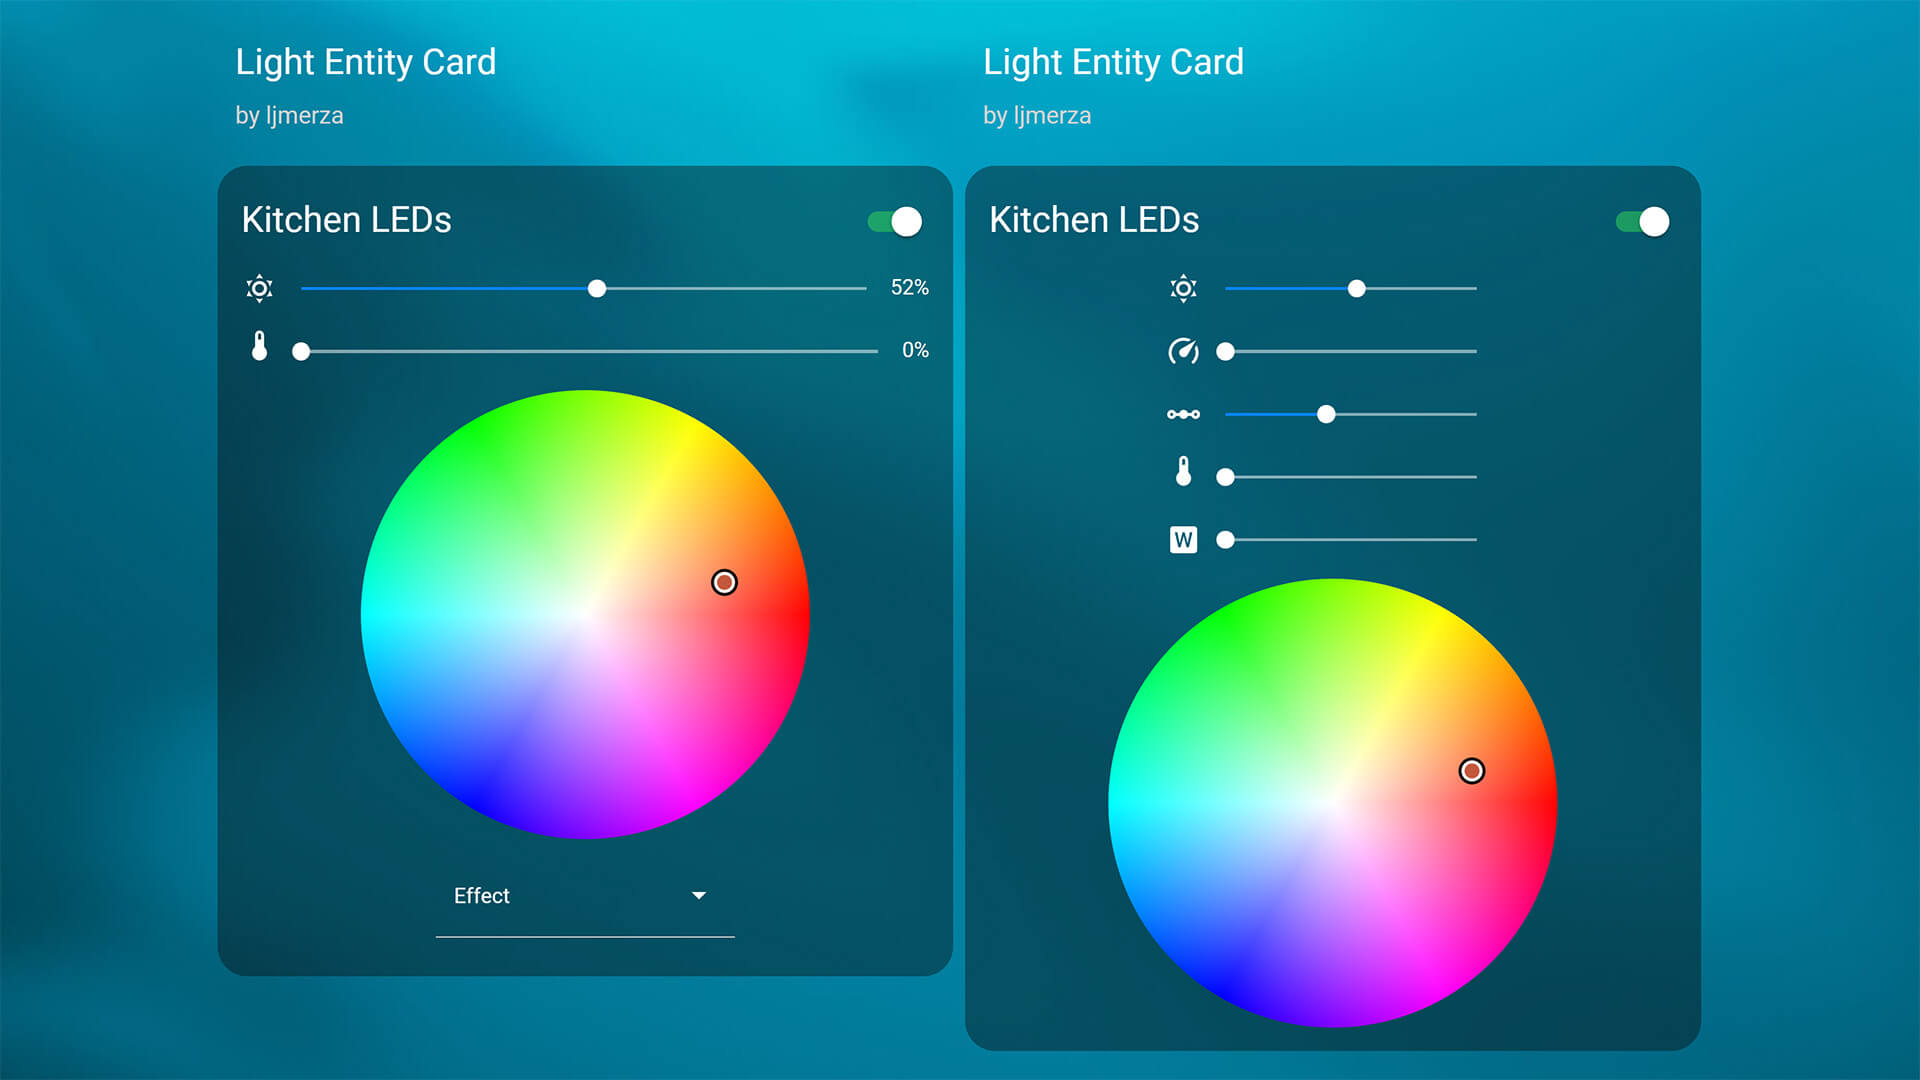 Light Entity Card Home Assistant